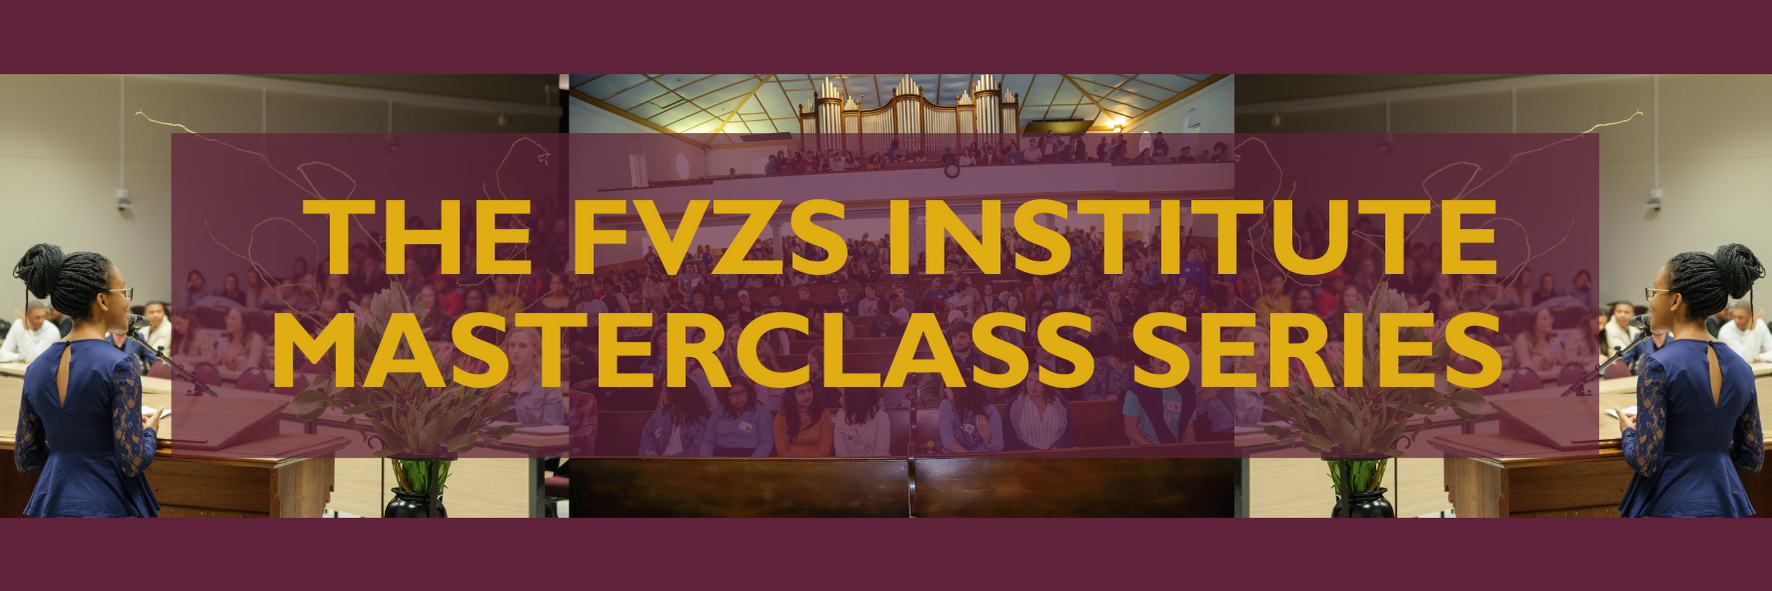 Masterclass_FVZS Banners.png